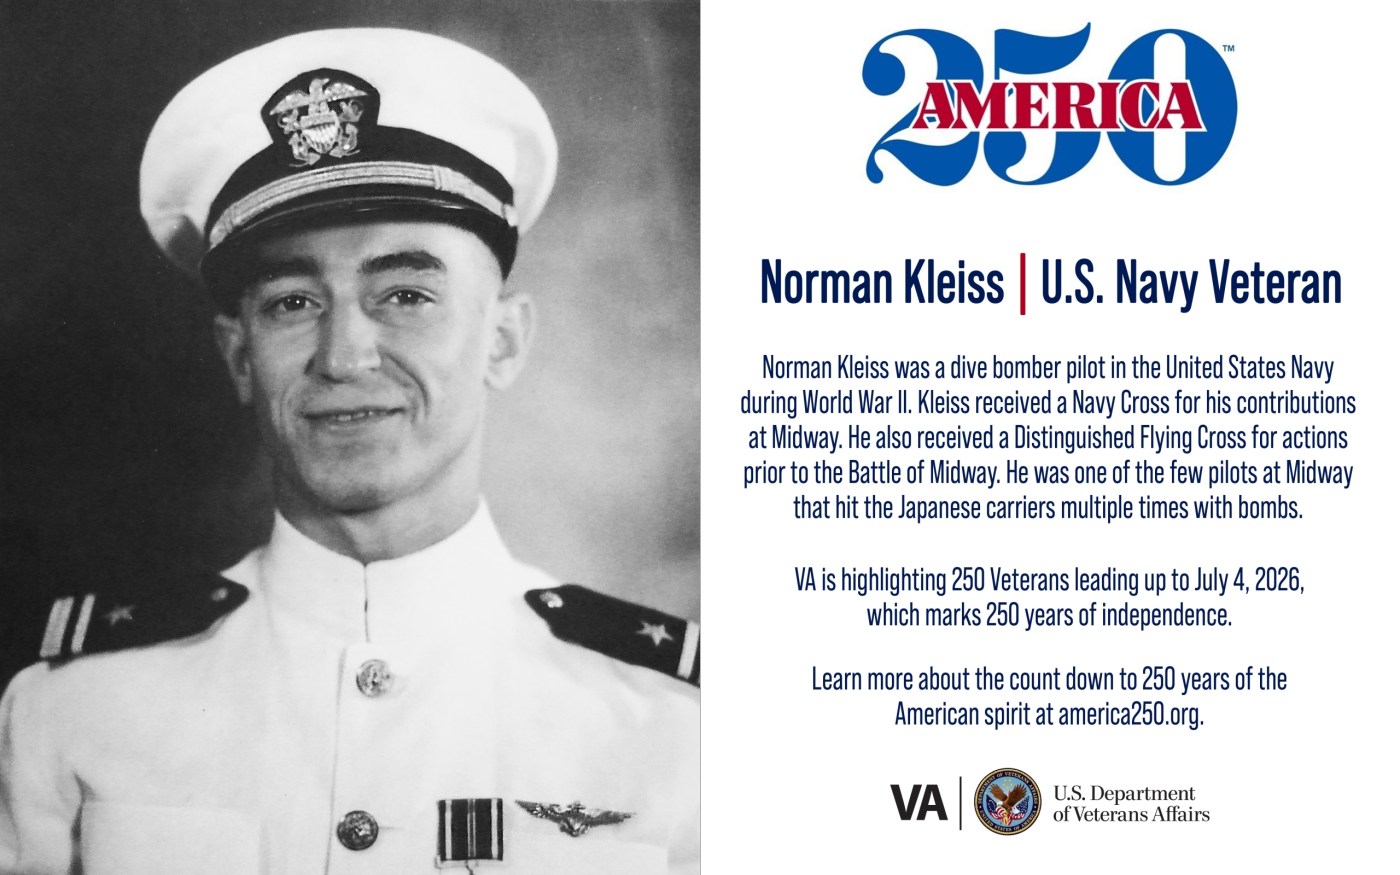 This week’s America250 salute is Navy Veteran Norman Kleiss, who served as a dive bomber pilot during the Battle of Midway and World War II.